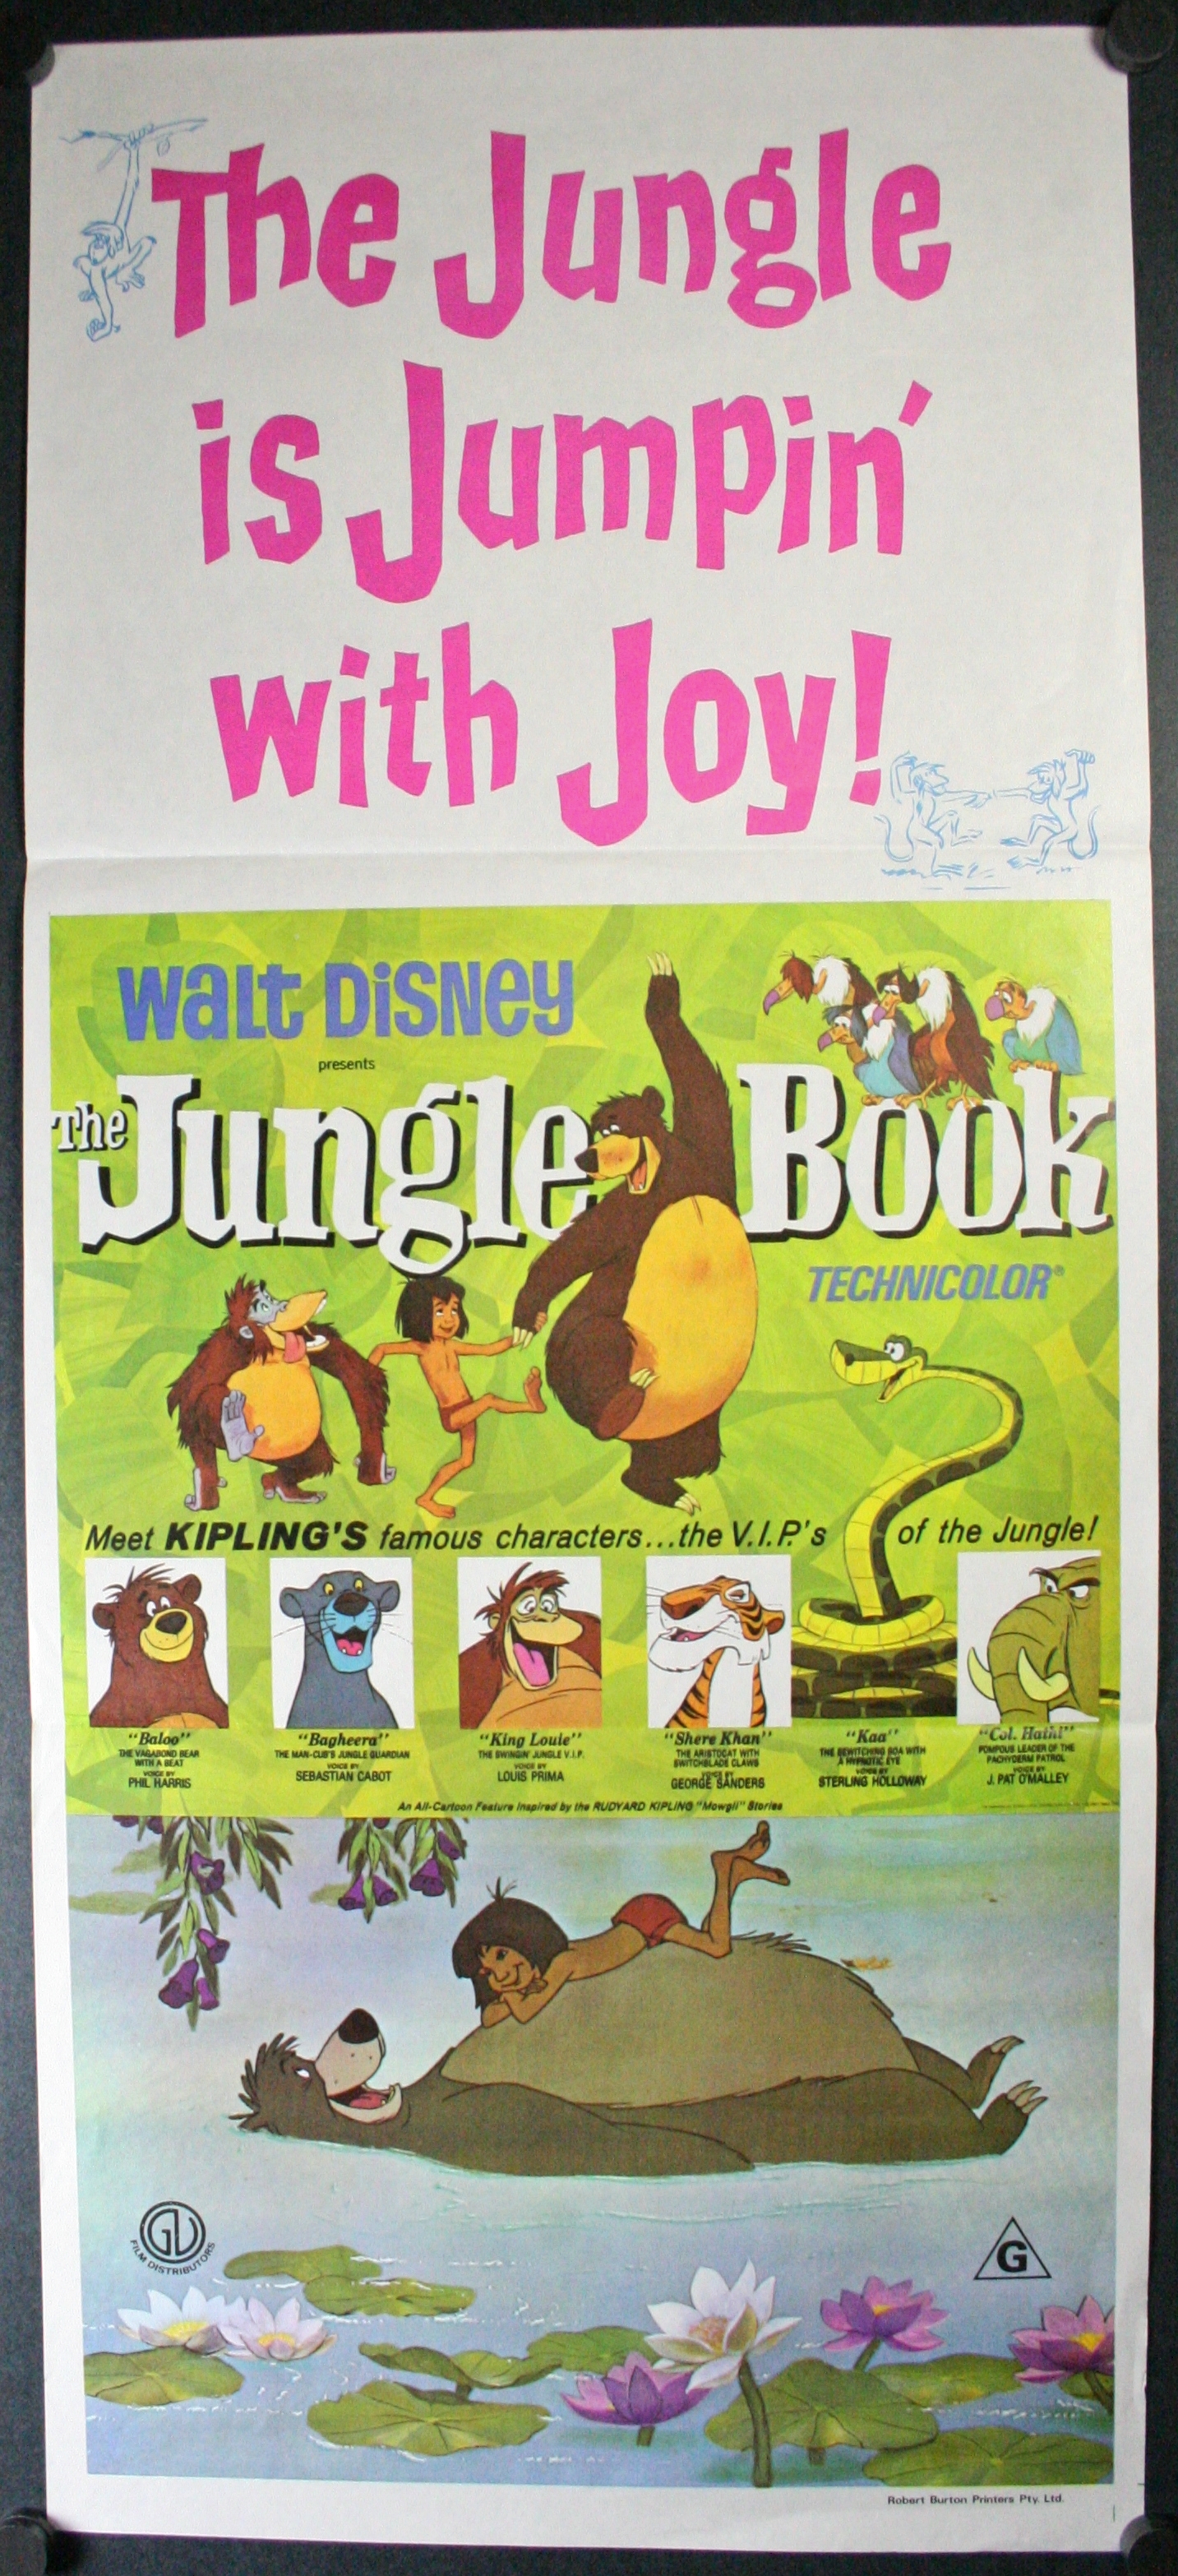 the jungle book is written by